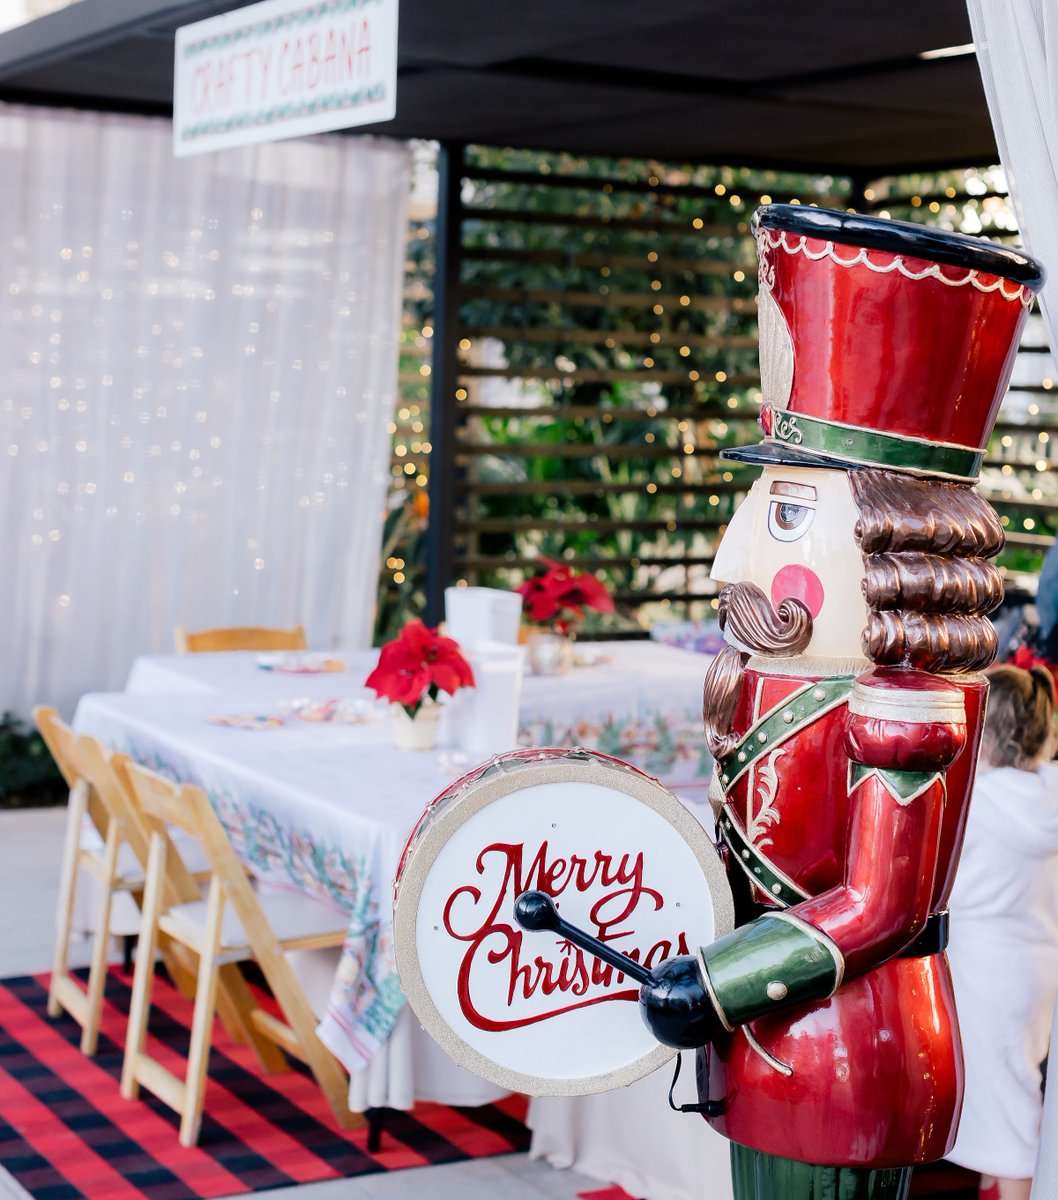 Join us poolside and stop by each cabana to experience a variety of specialty offerings guests of all ages can enjoy at our annual Cabana Christmas Village